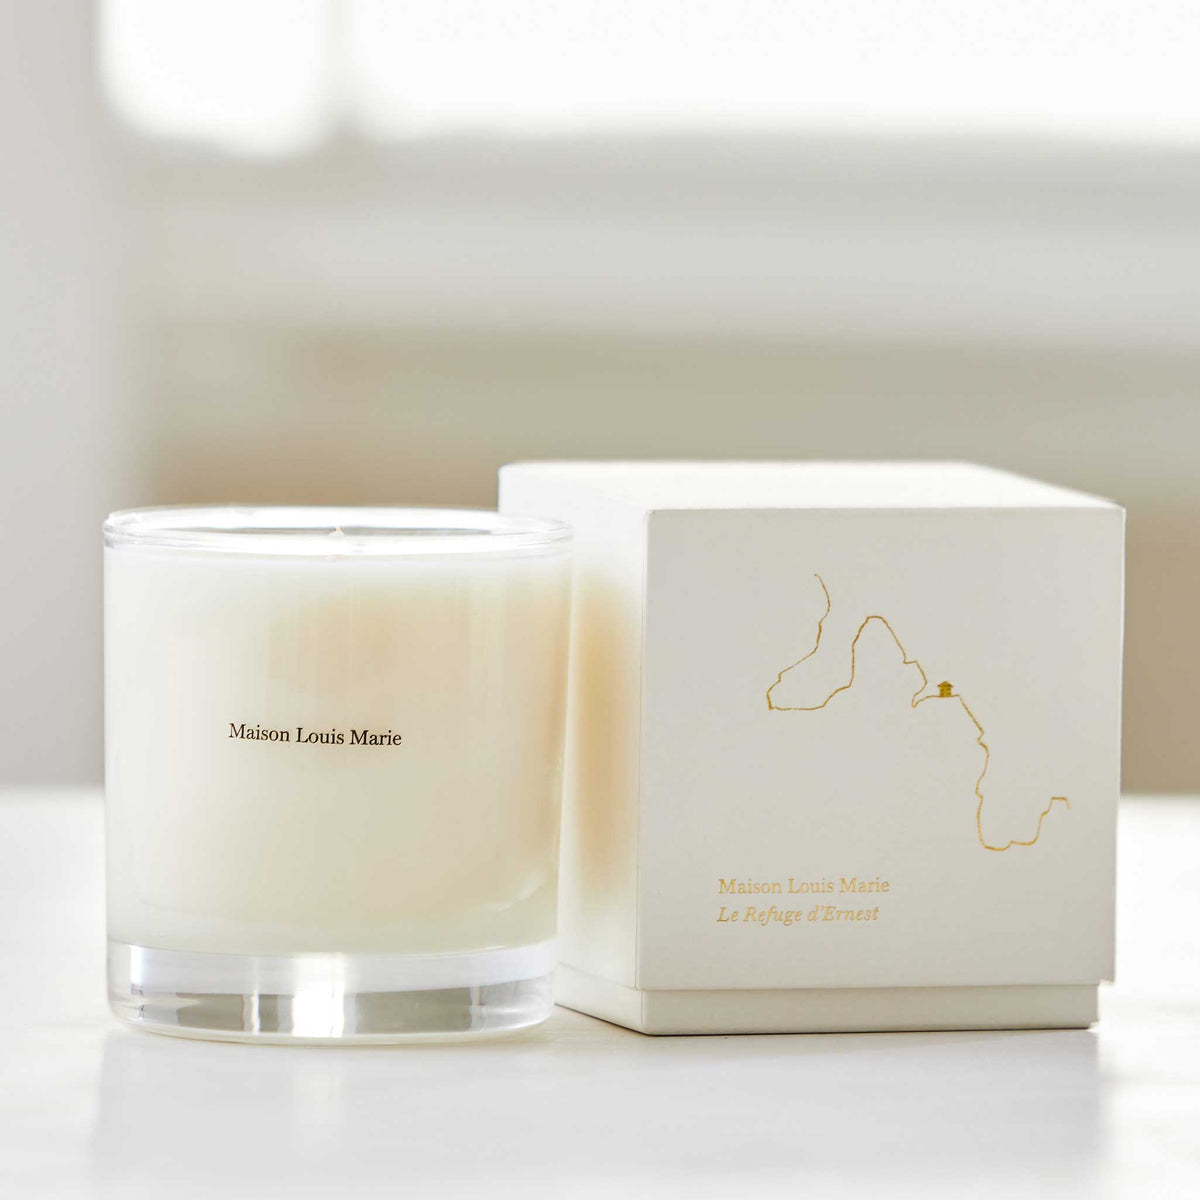 MAISON LOUIS MARIE LIMITED EDITION CANDLE